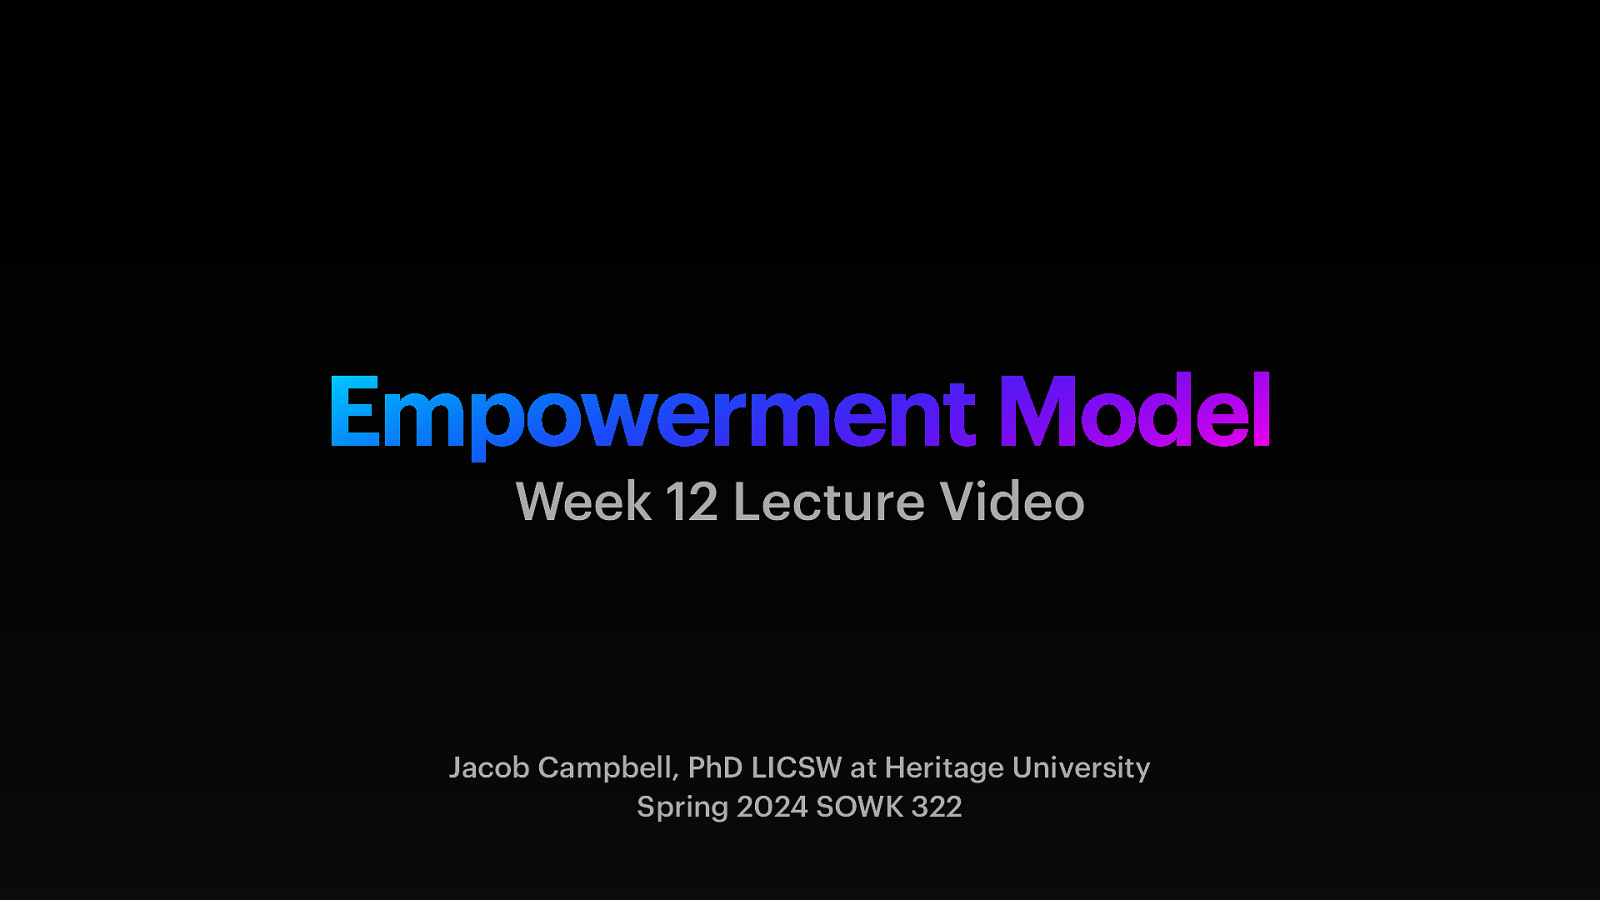 Spring 2024 SOWK 322 Week 12 Lecture Video and the Empowerment Model